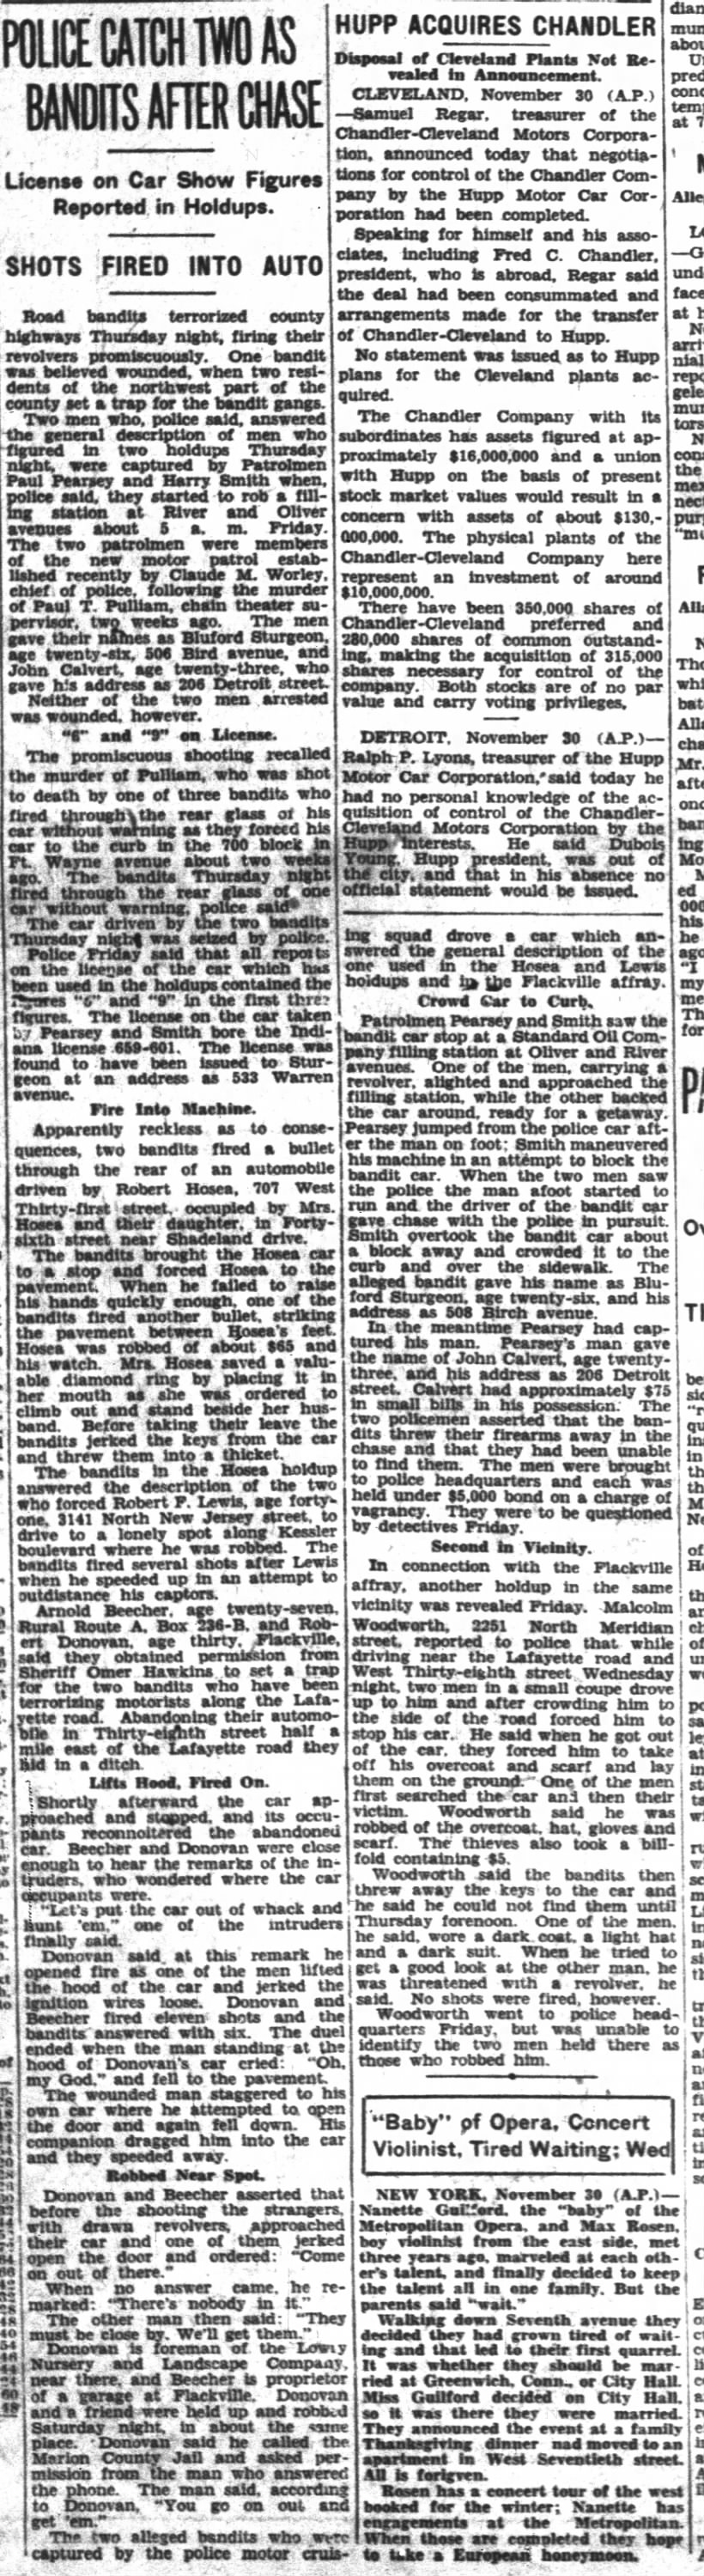 November 30, 1928 story about Paul Pearsey capturing suspects.